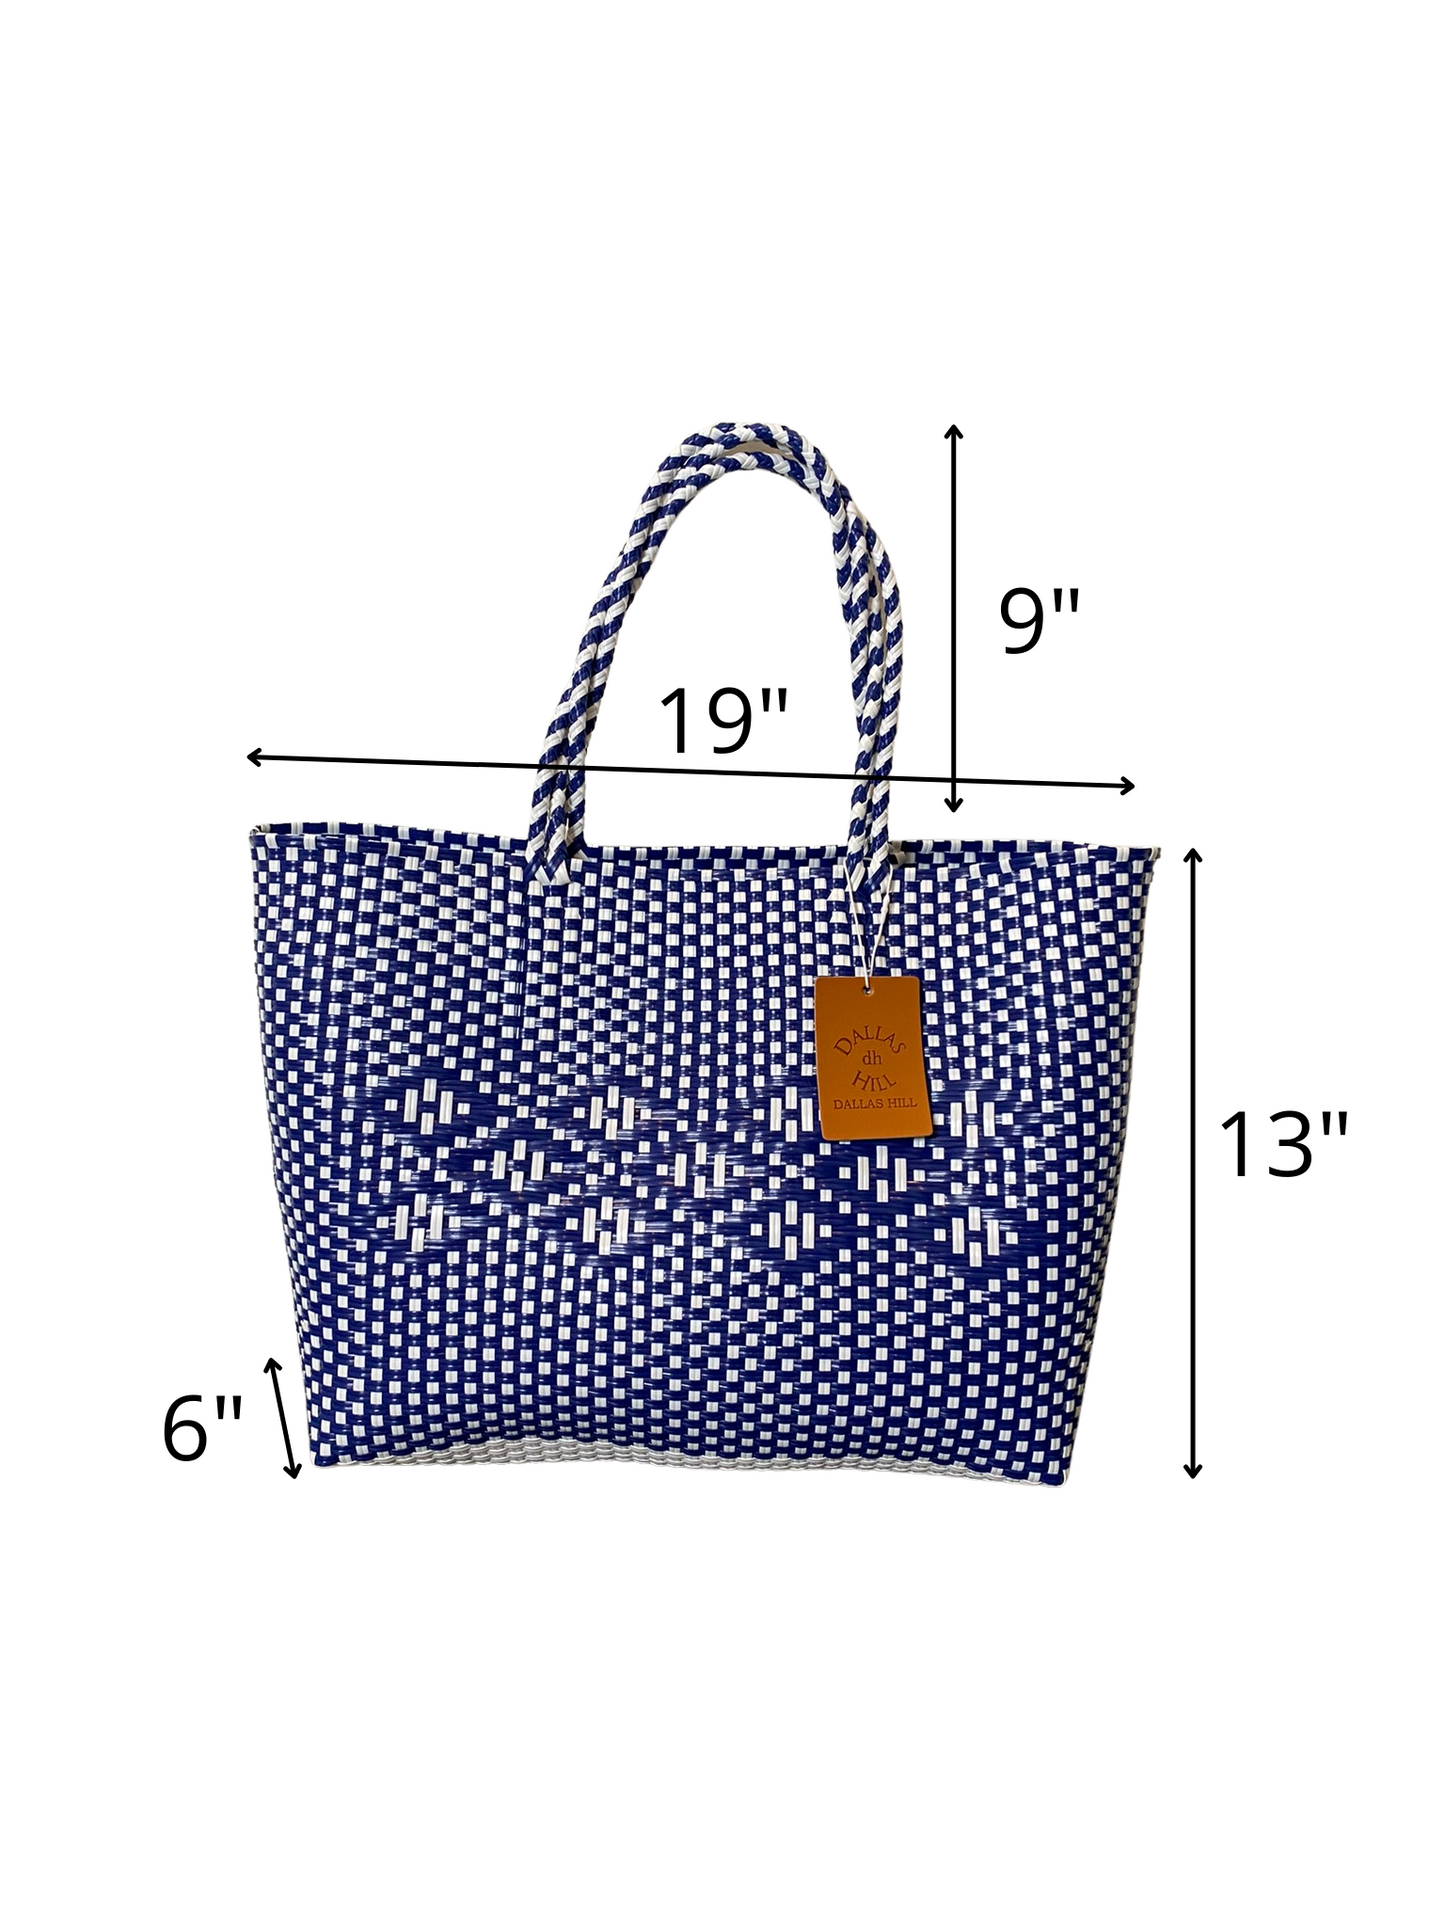 Dallas Hill Designs Handwoven Super Tote Bag for Women | Recycled Plastic  Shoulder Purse | Summer Beach, and Travel Handbag